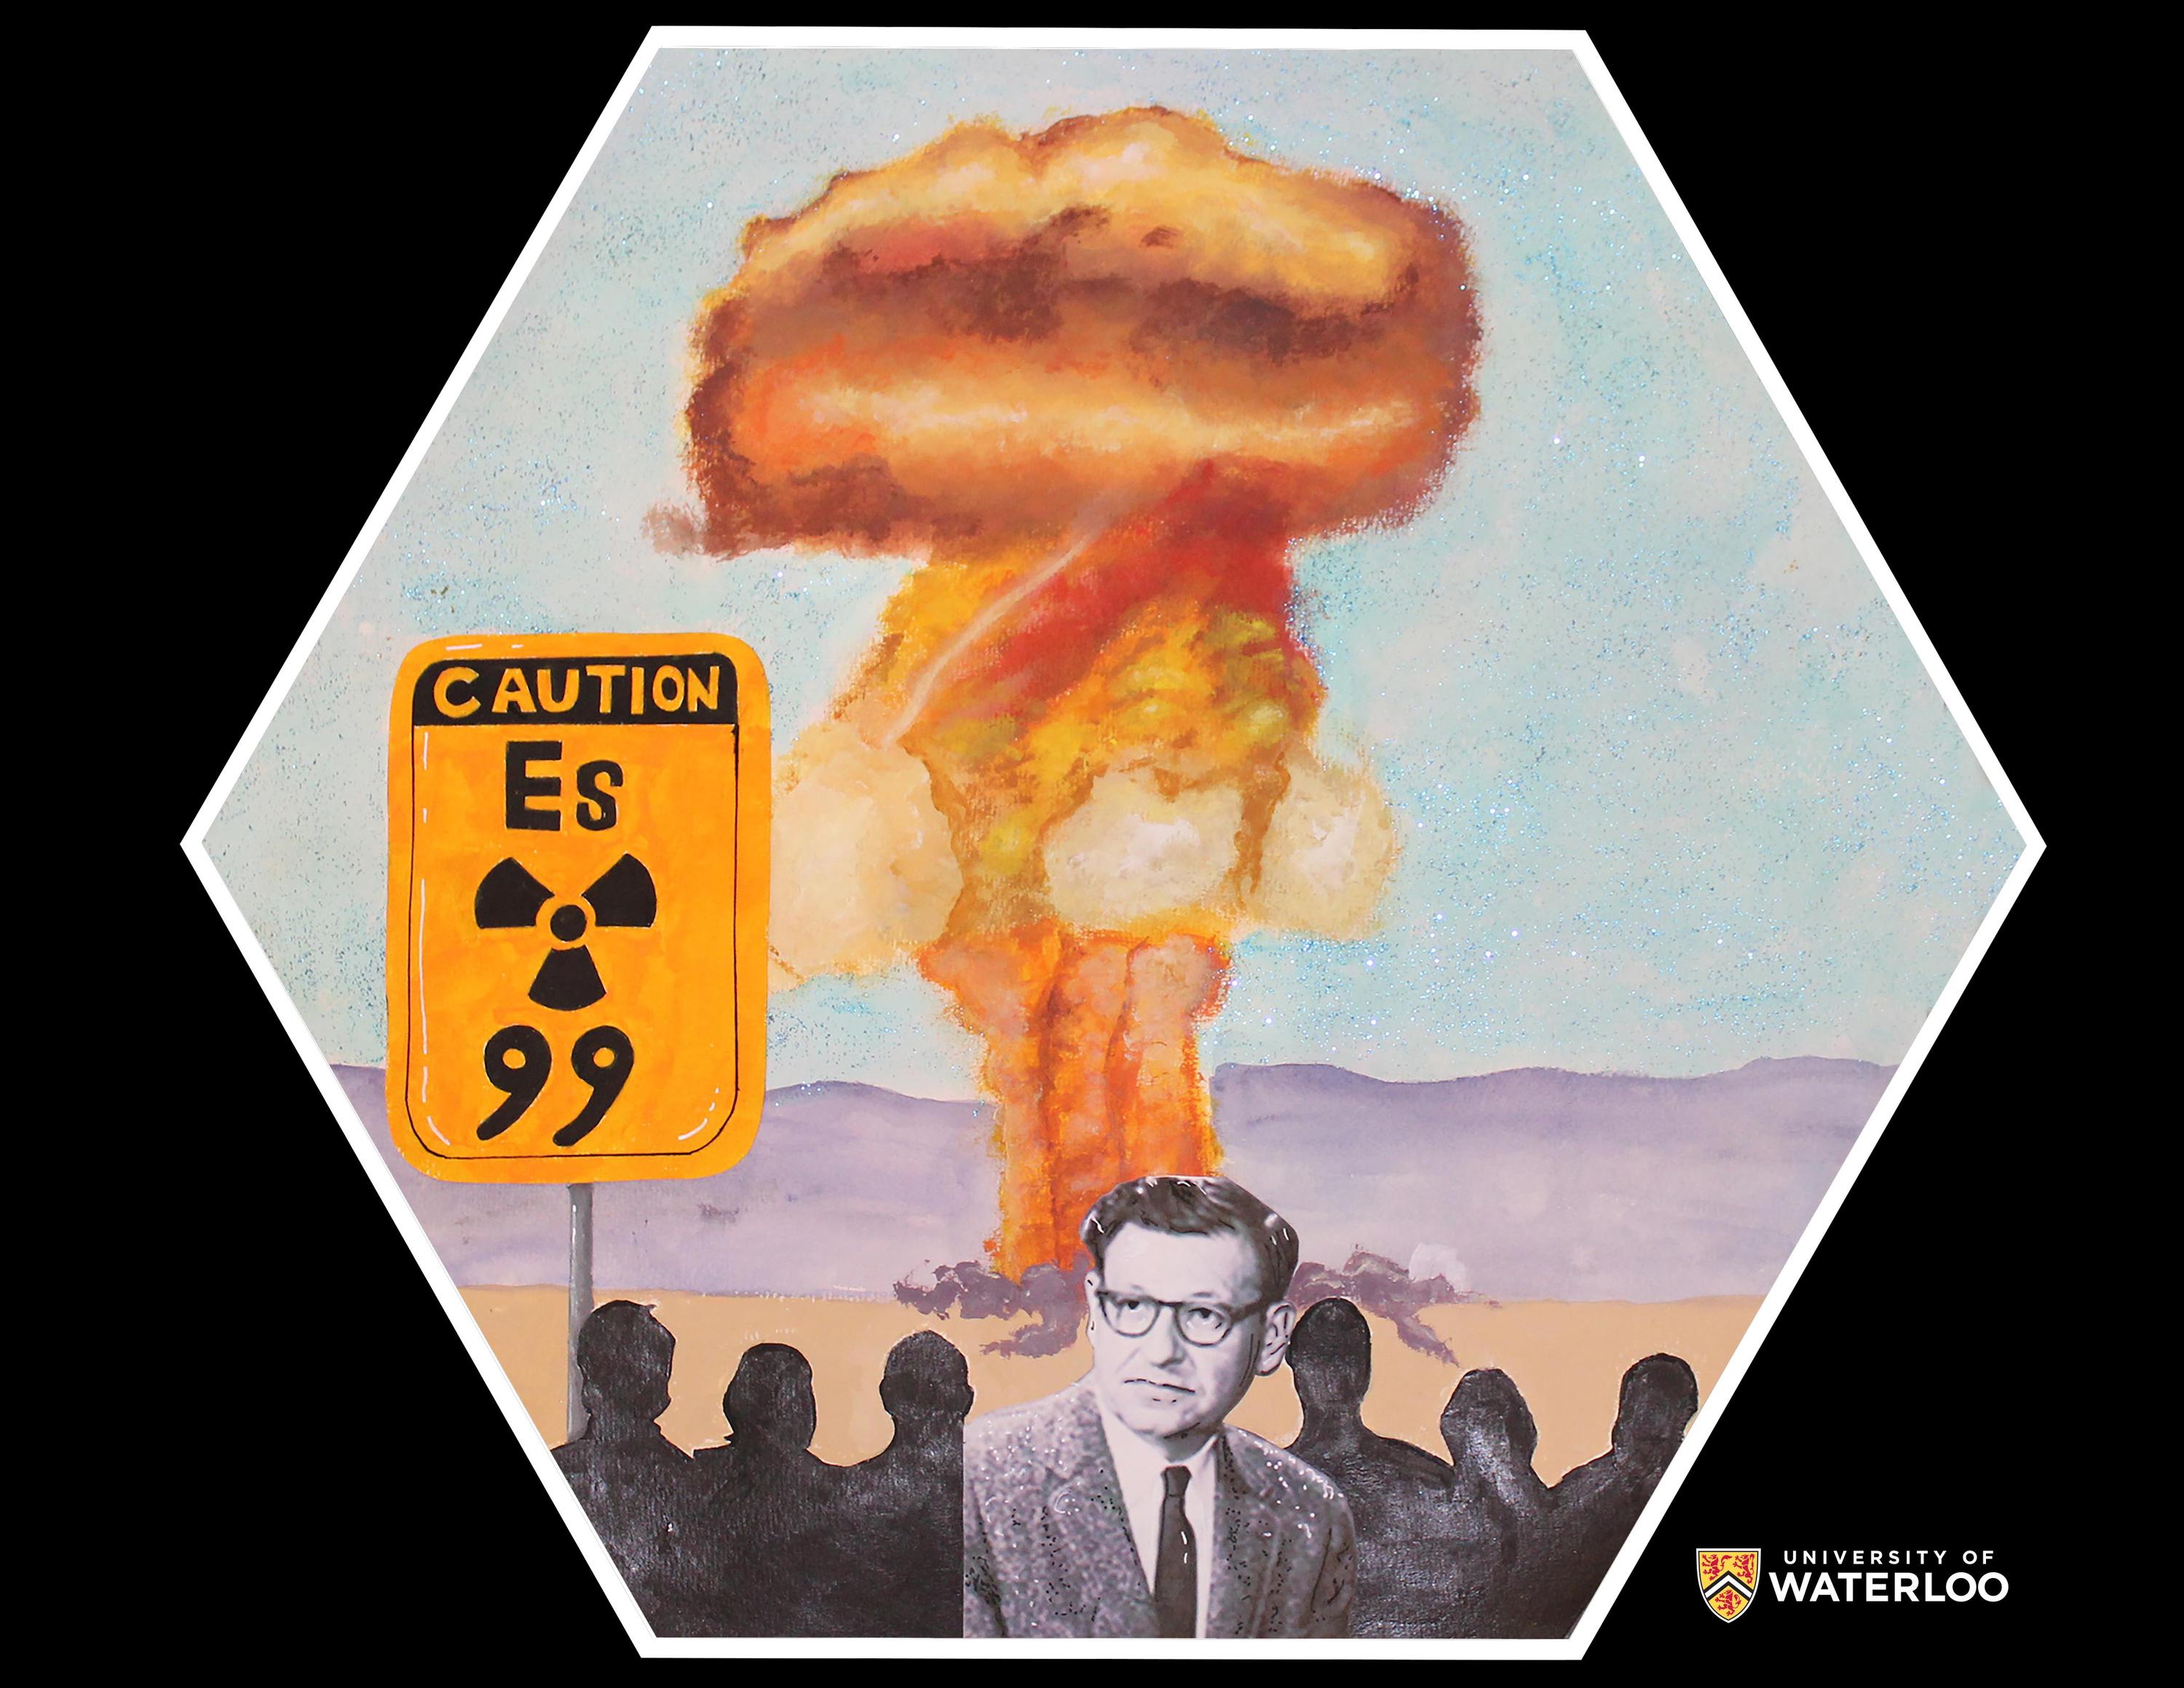 Digital composite. Albert Ghiorso appears in the centre bottom in front of a series of sillohettes. The background shows a beach scene and a nuclear explosion above. In the foreground is an orange road sign with “Caution”, “Es”, the nuclear symbol and atomic number “99” below.